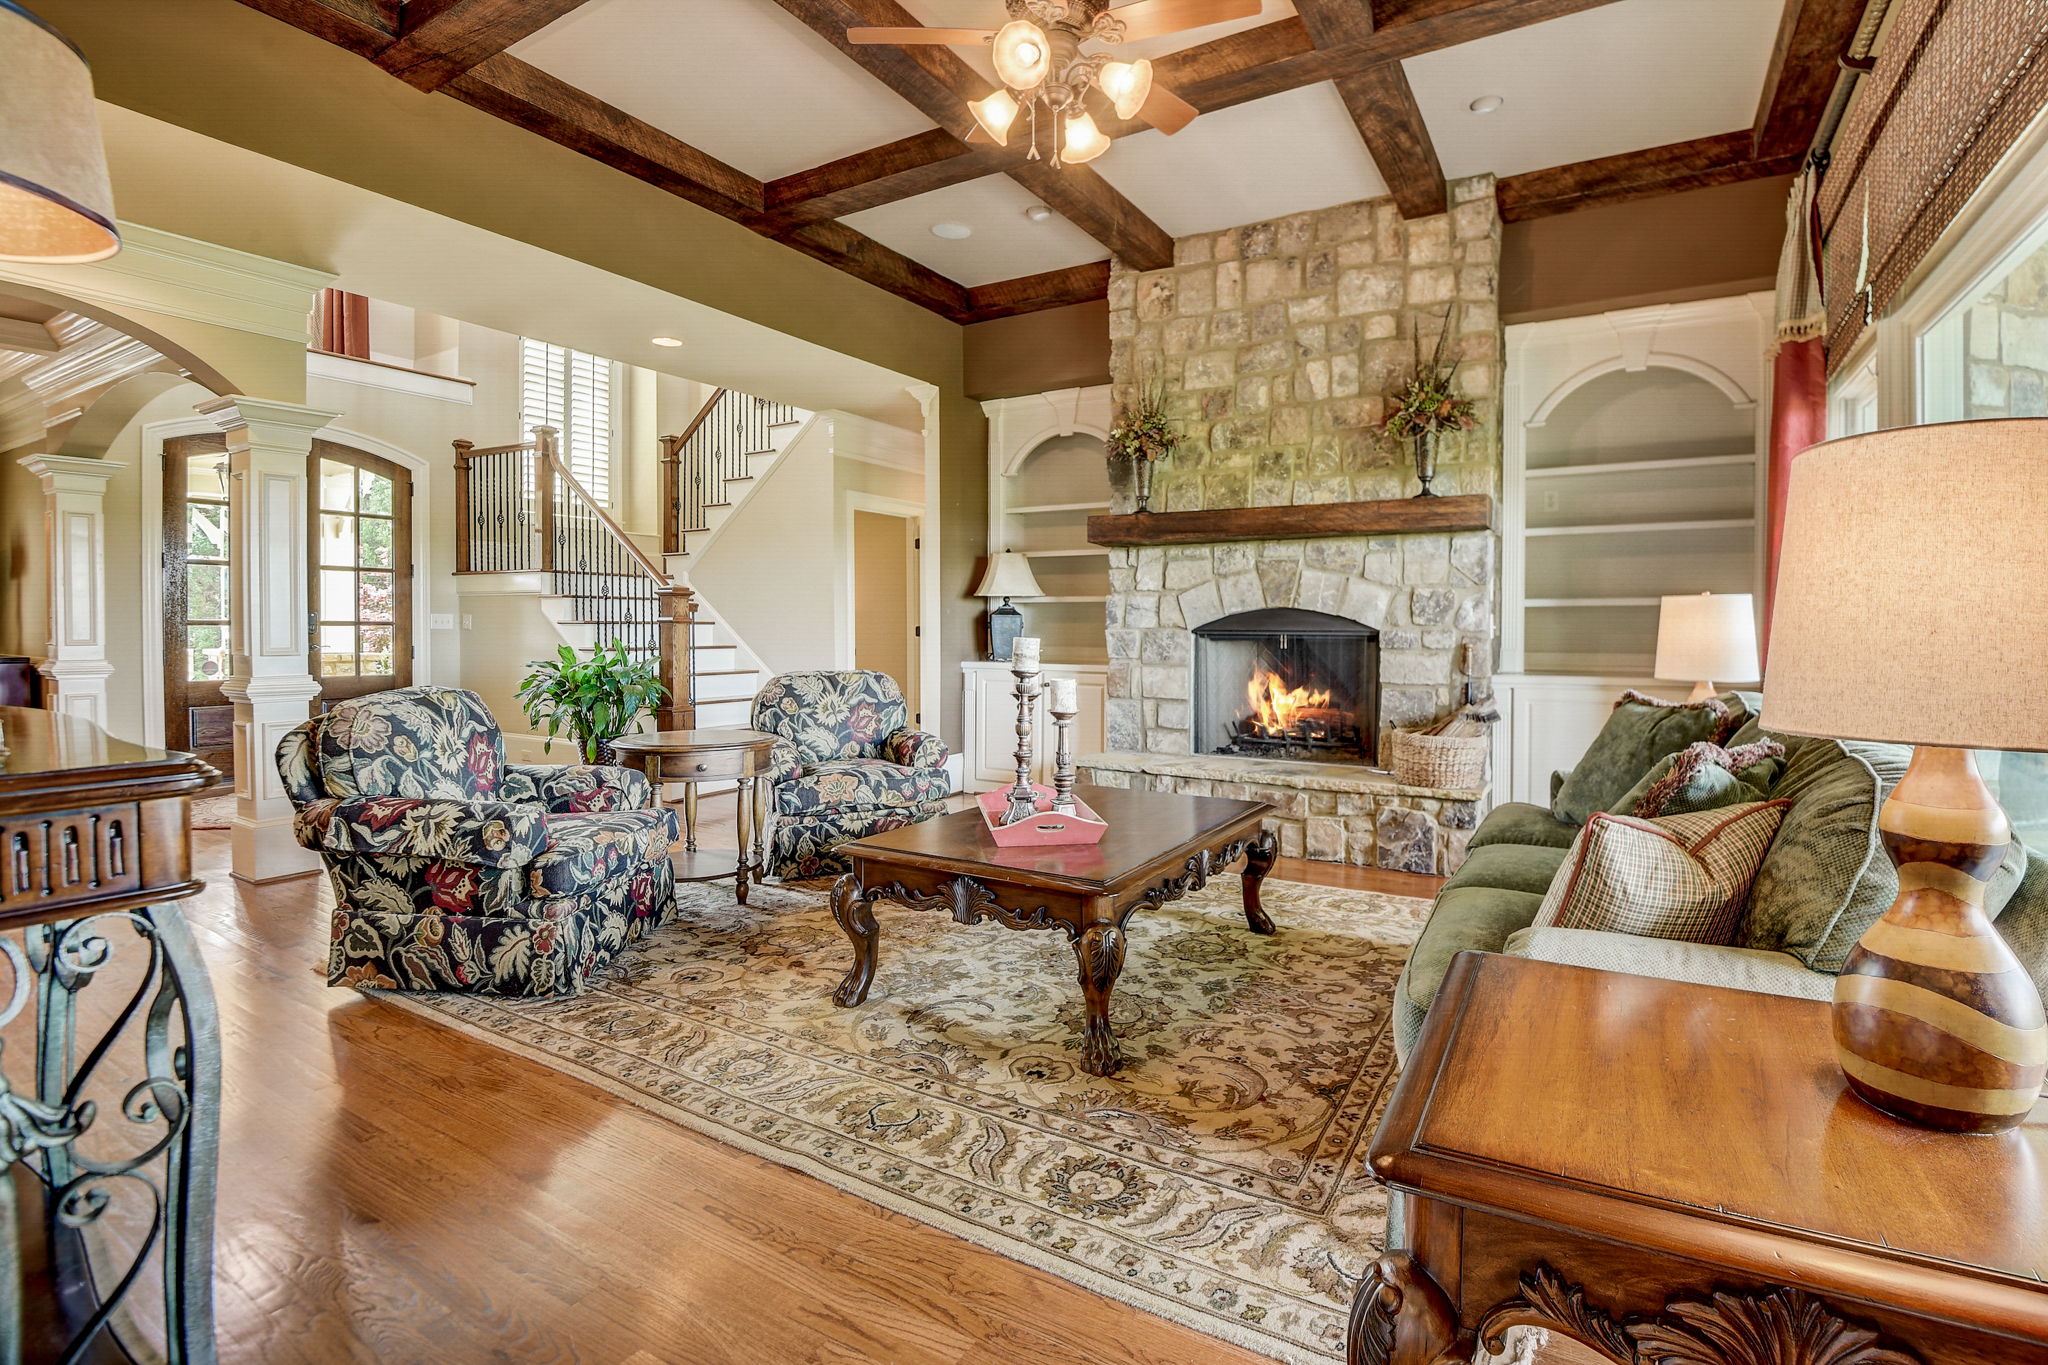 Spacious Living Room with Coffered Ceiling Made with REAL Cedar Beams, Stately Fireplace and Built-in's!